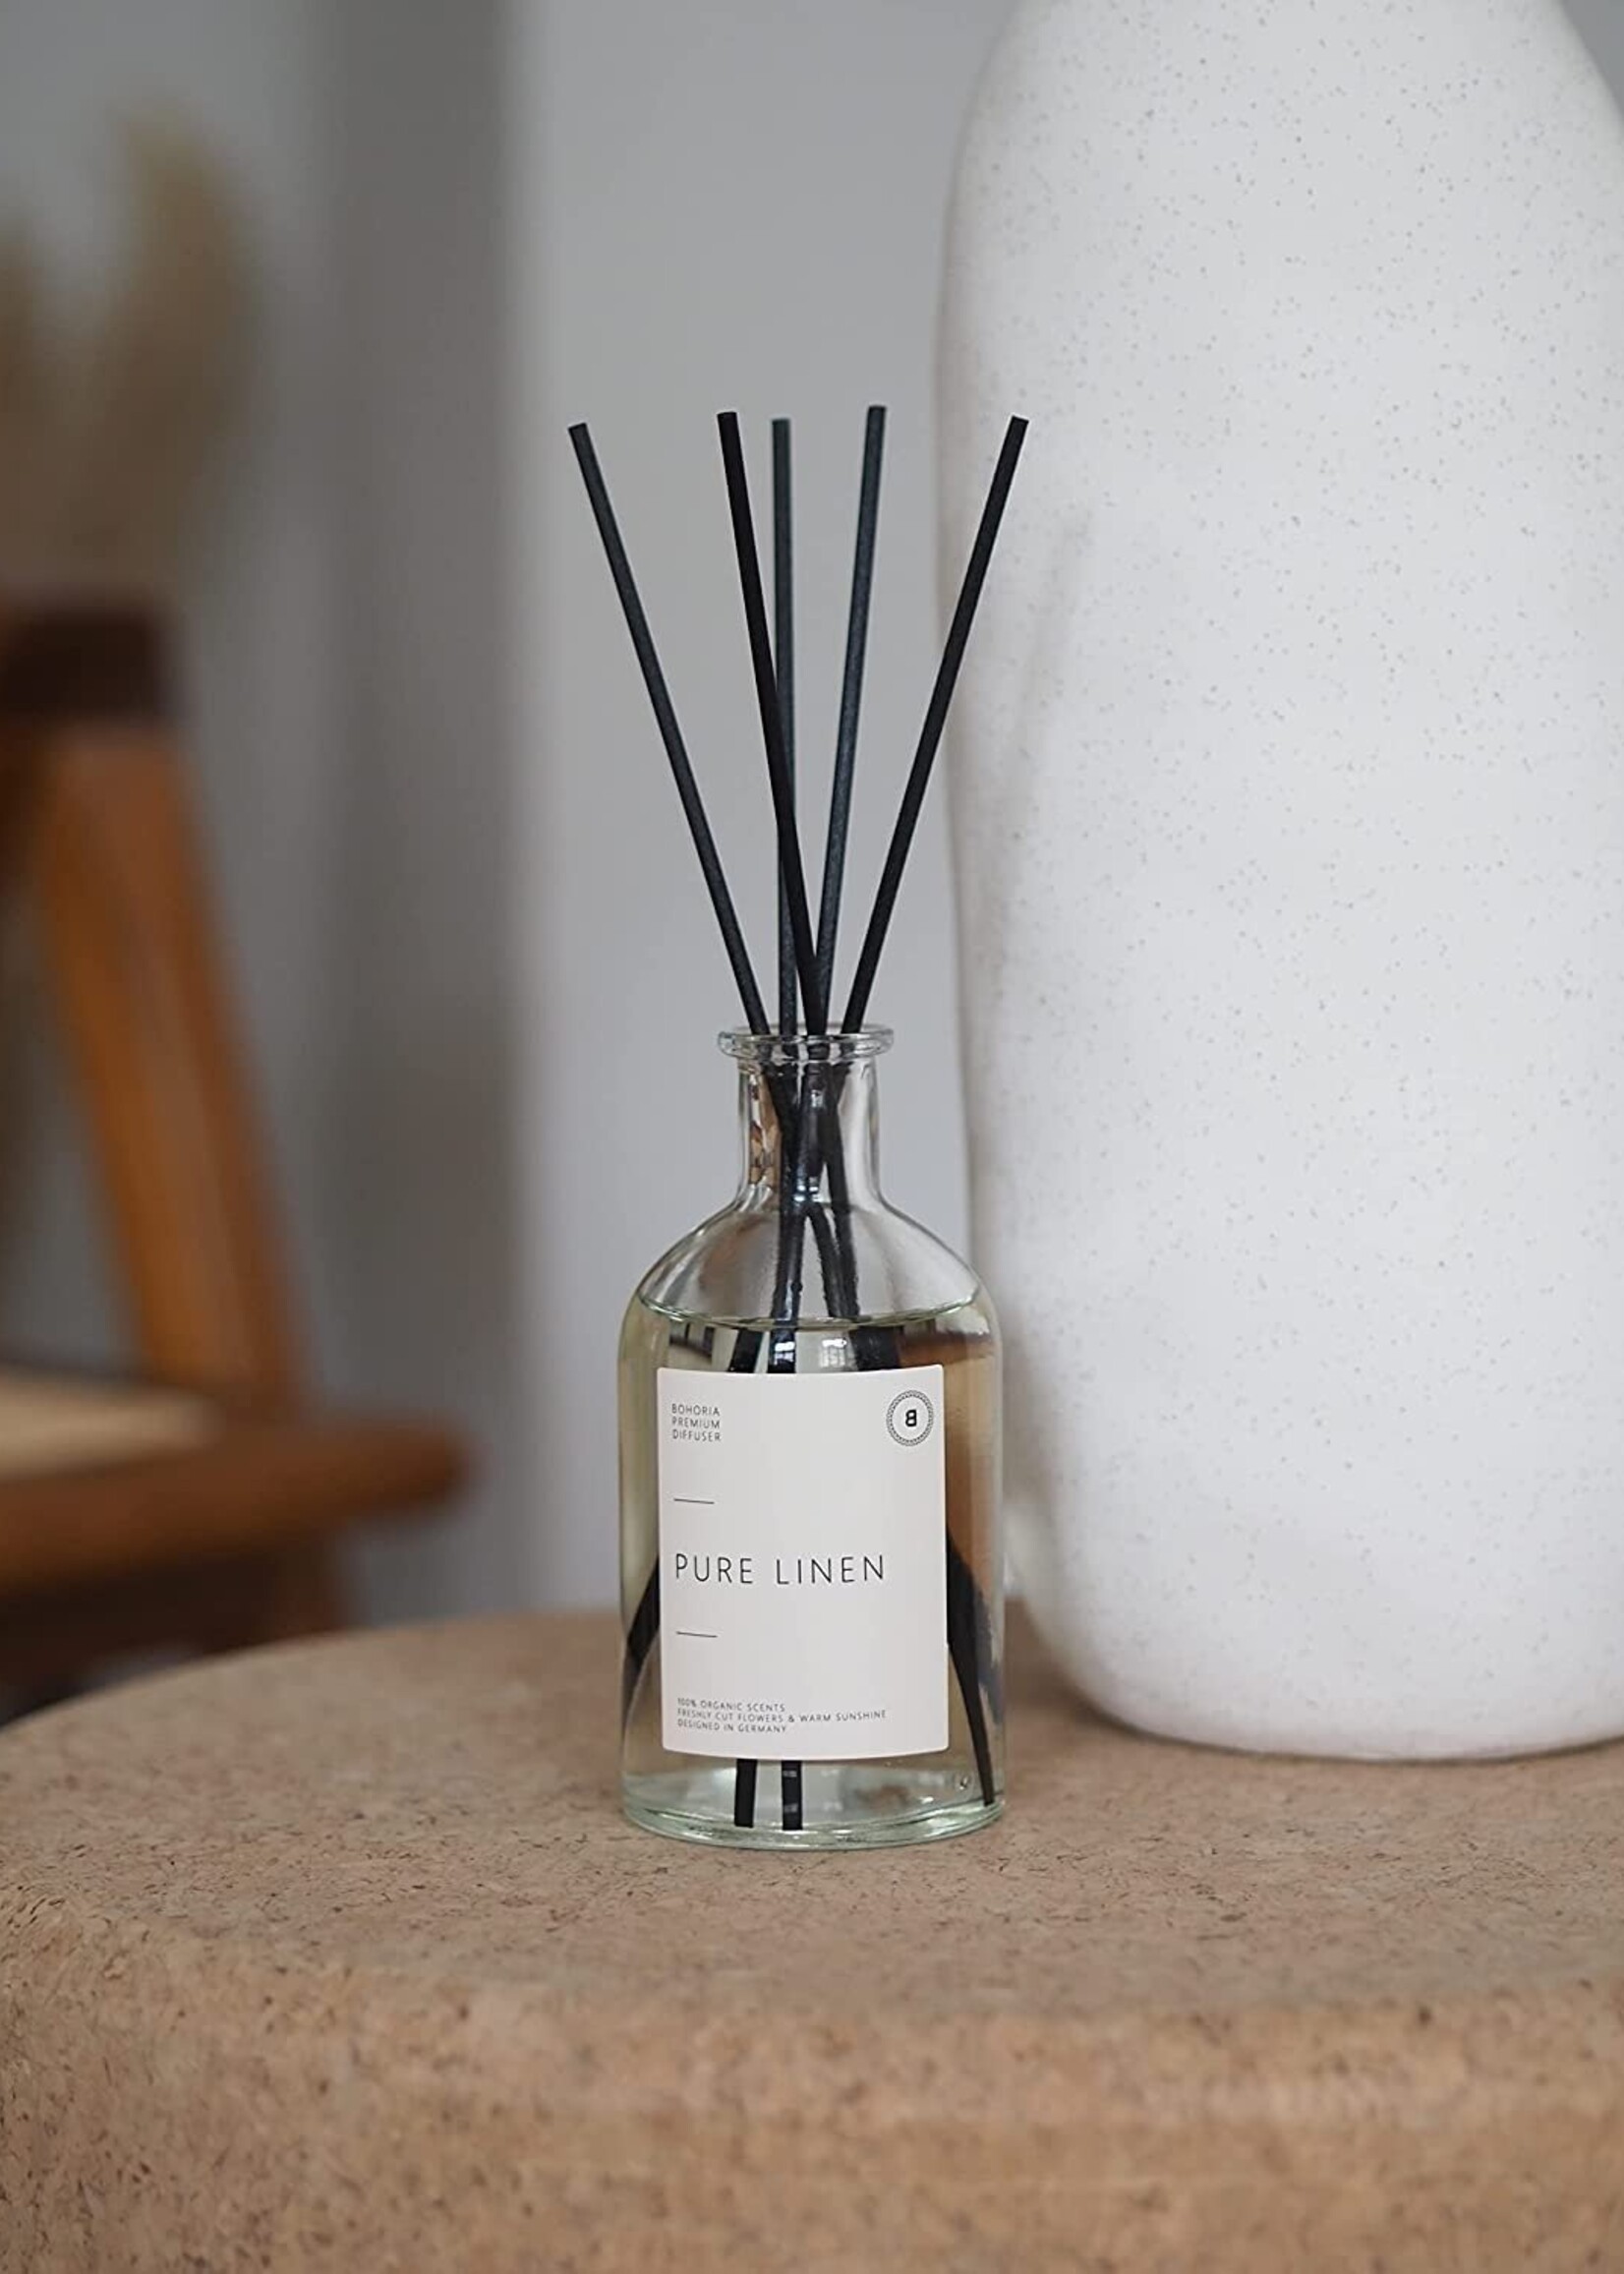 BOHORIA Room Diffuser "Oudh Obsessions"